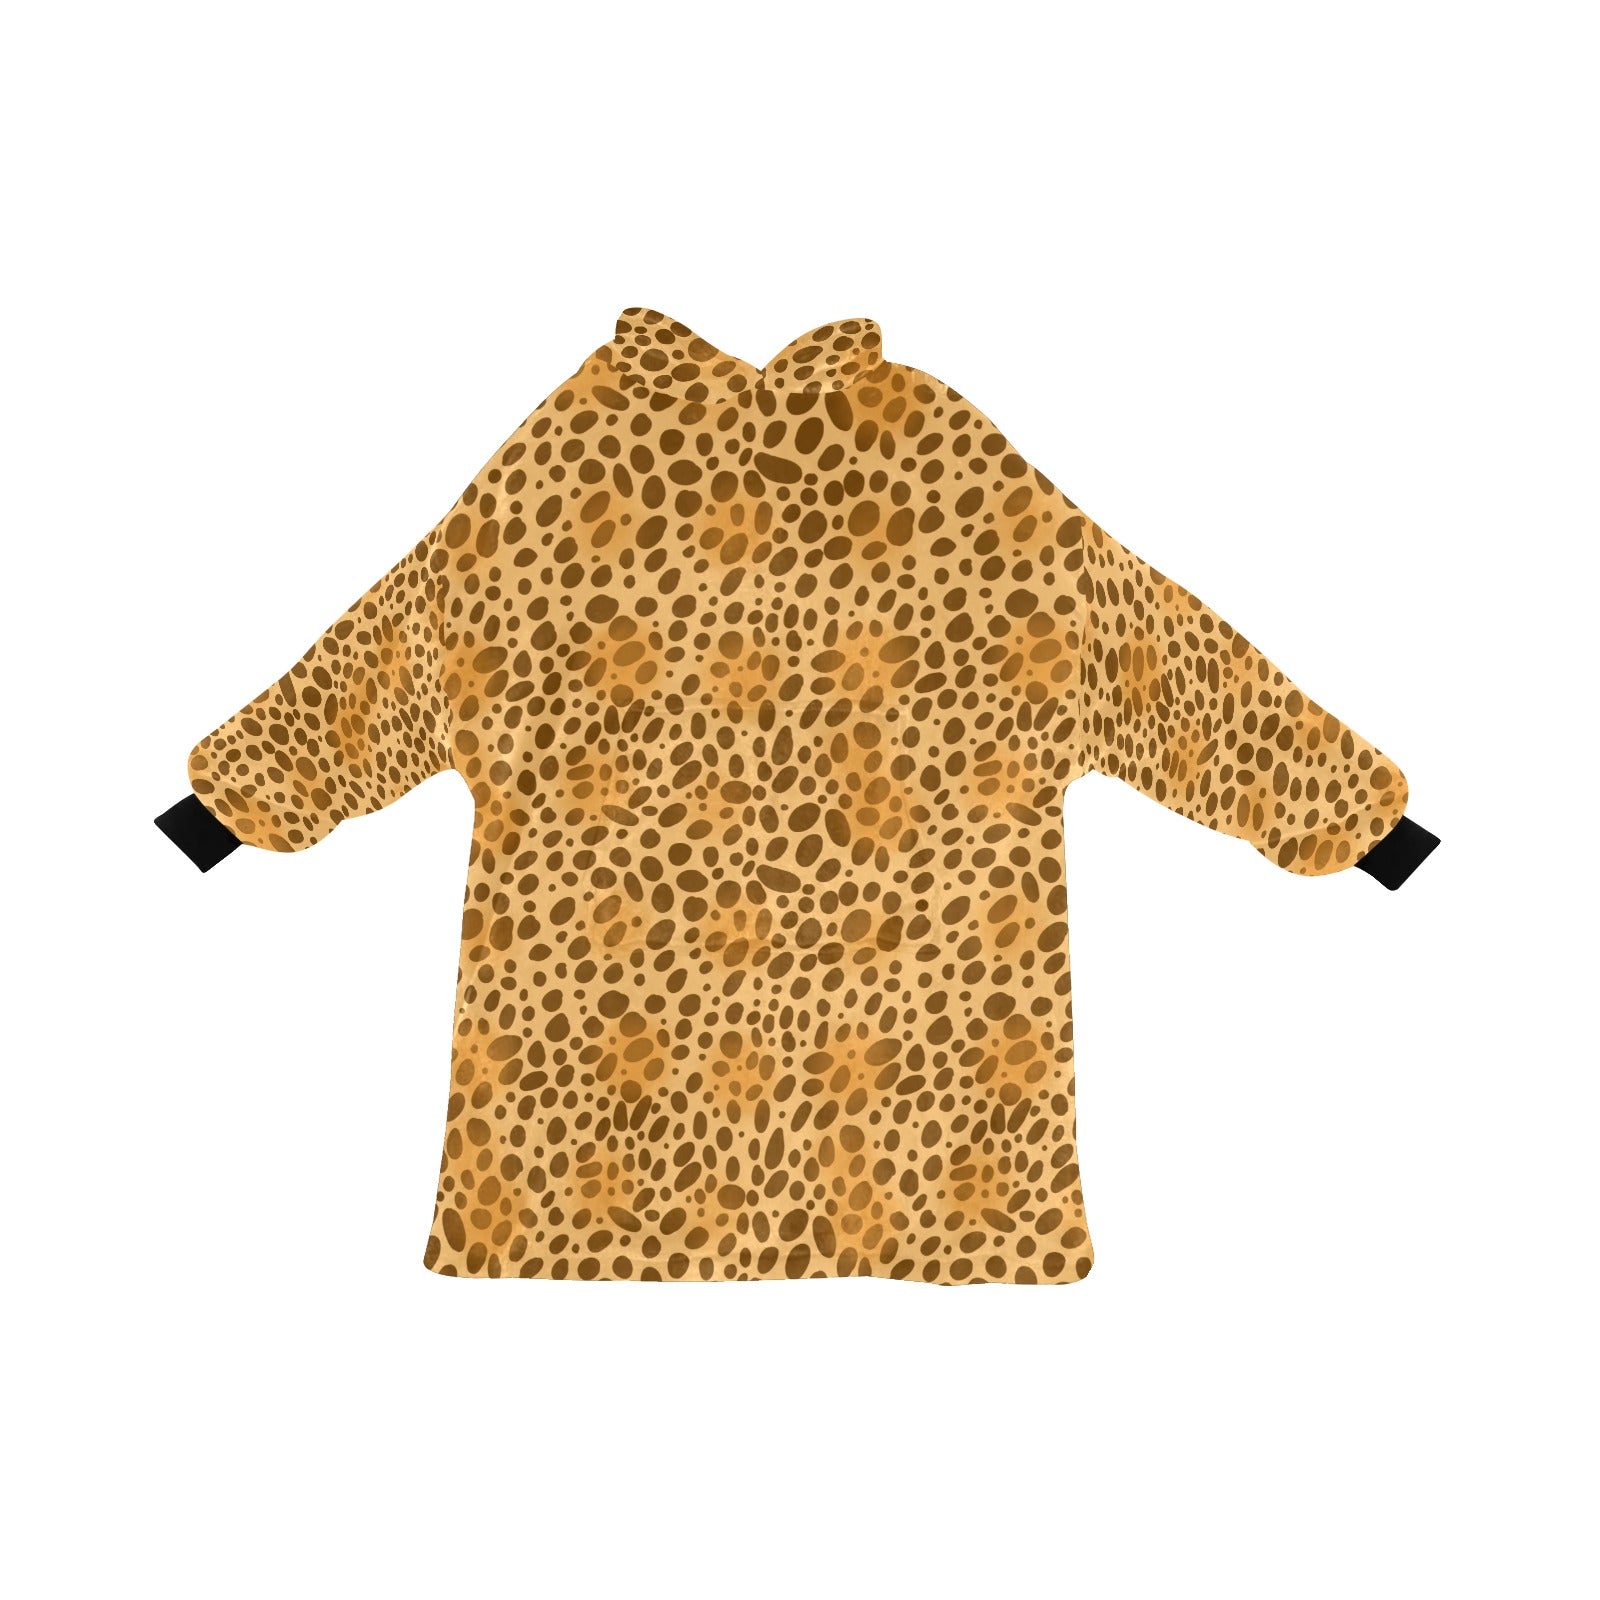 Leopard print fleece hooded blanket - Stay warm and trendy with this stylish and cozy fleece blanket featuring a striking leopard print pattern.